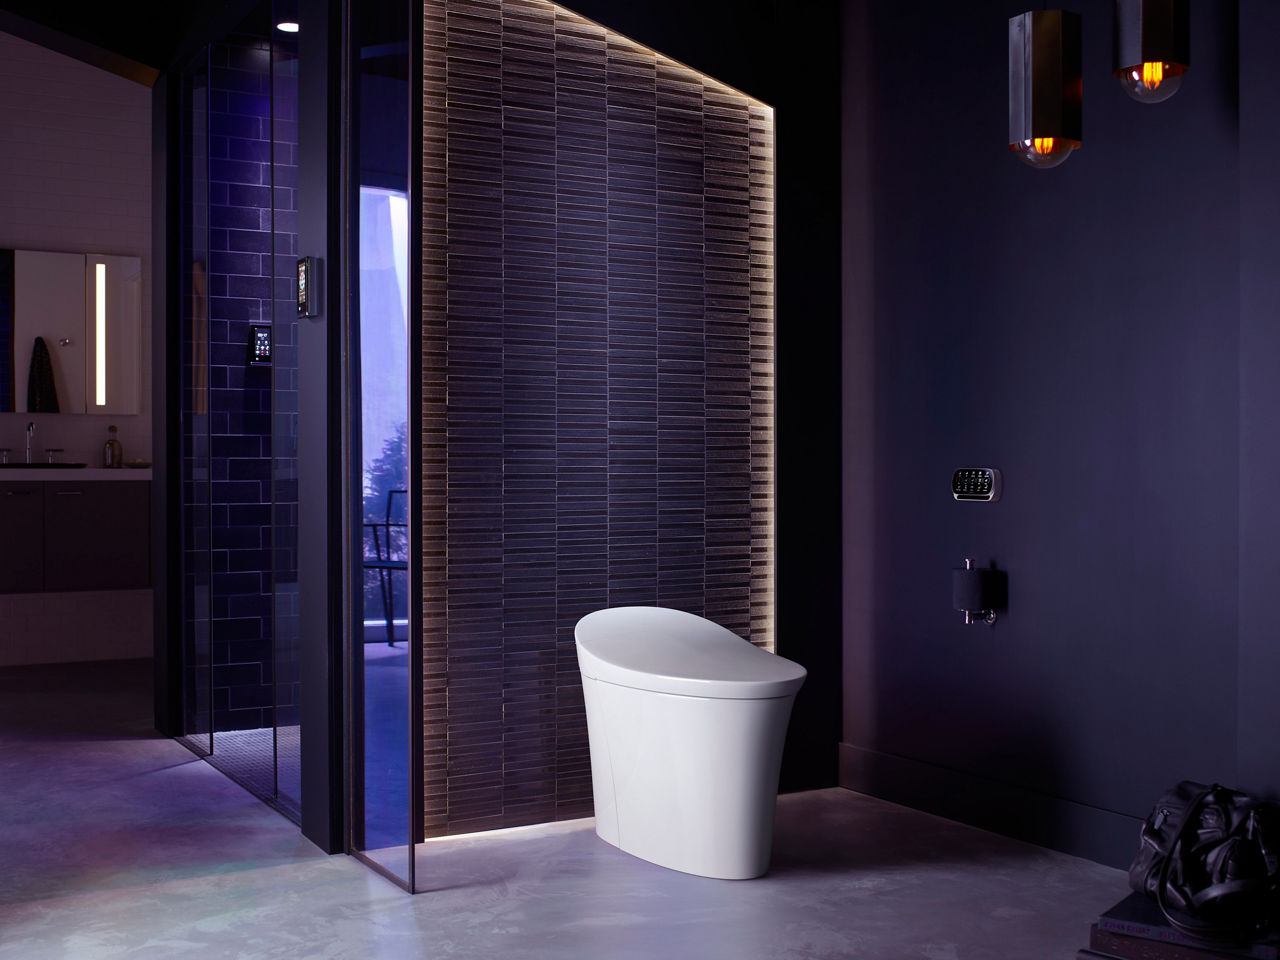 A Veil smart toilet in a bathroom illuminated in a soft purple light.